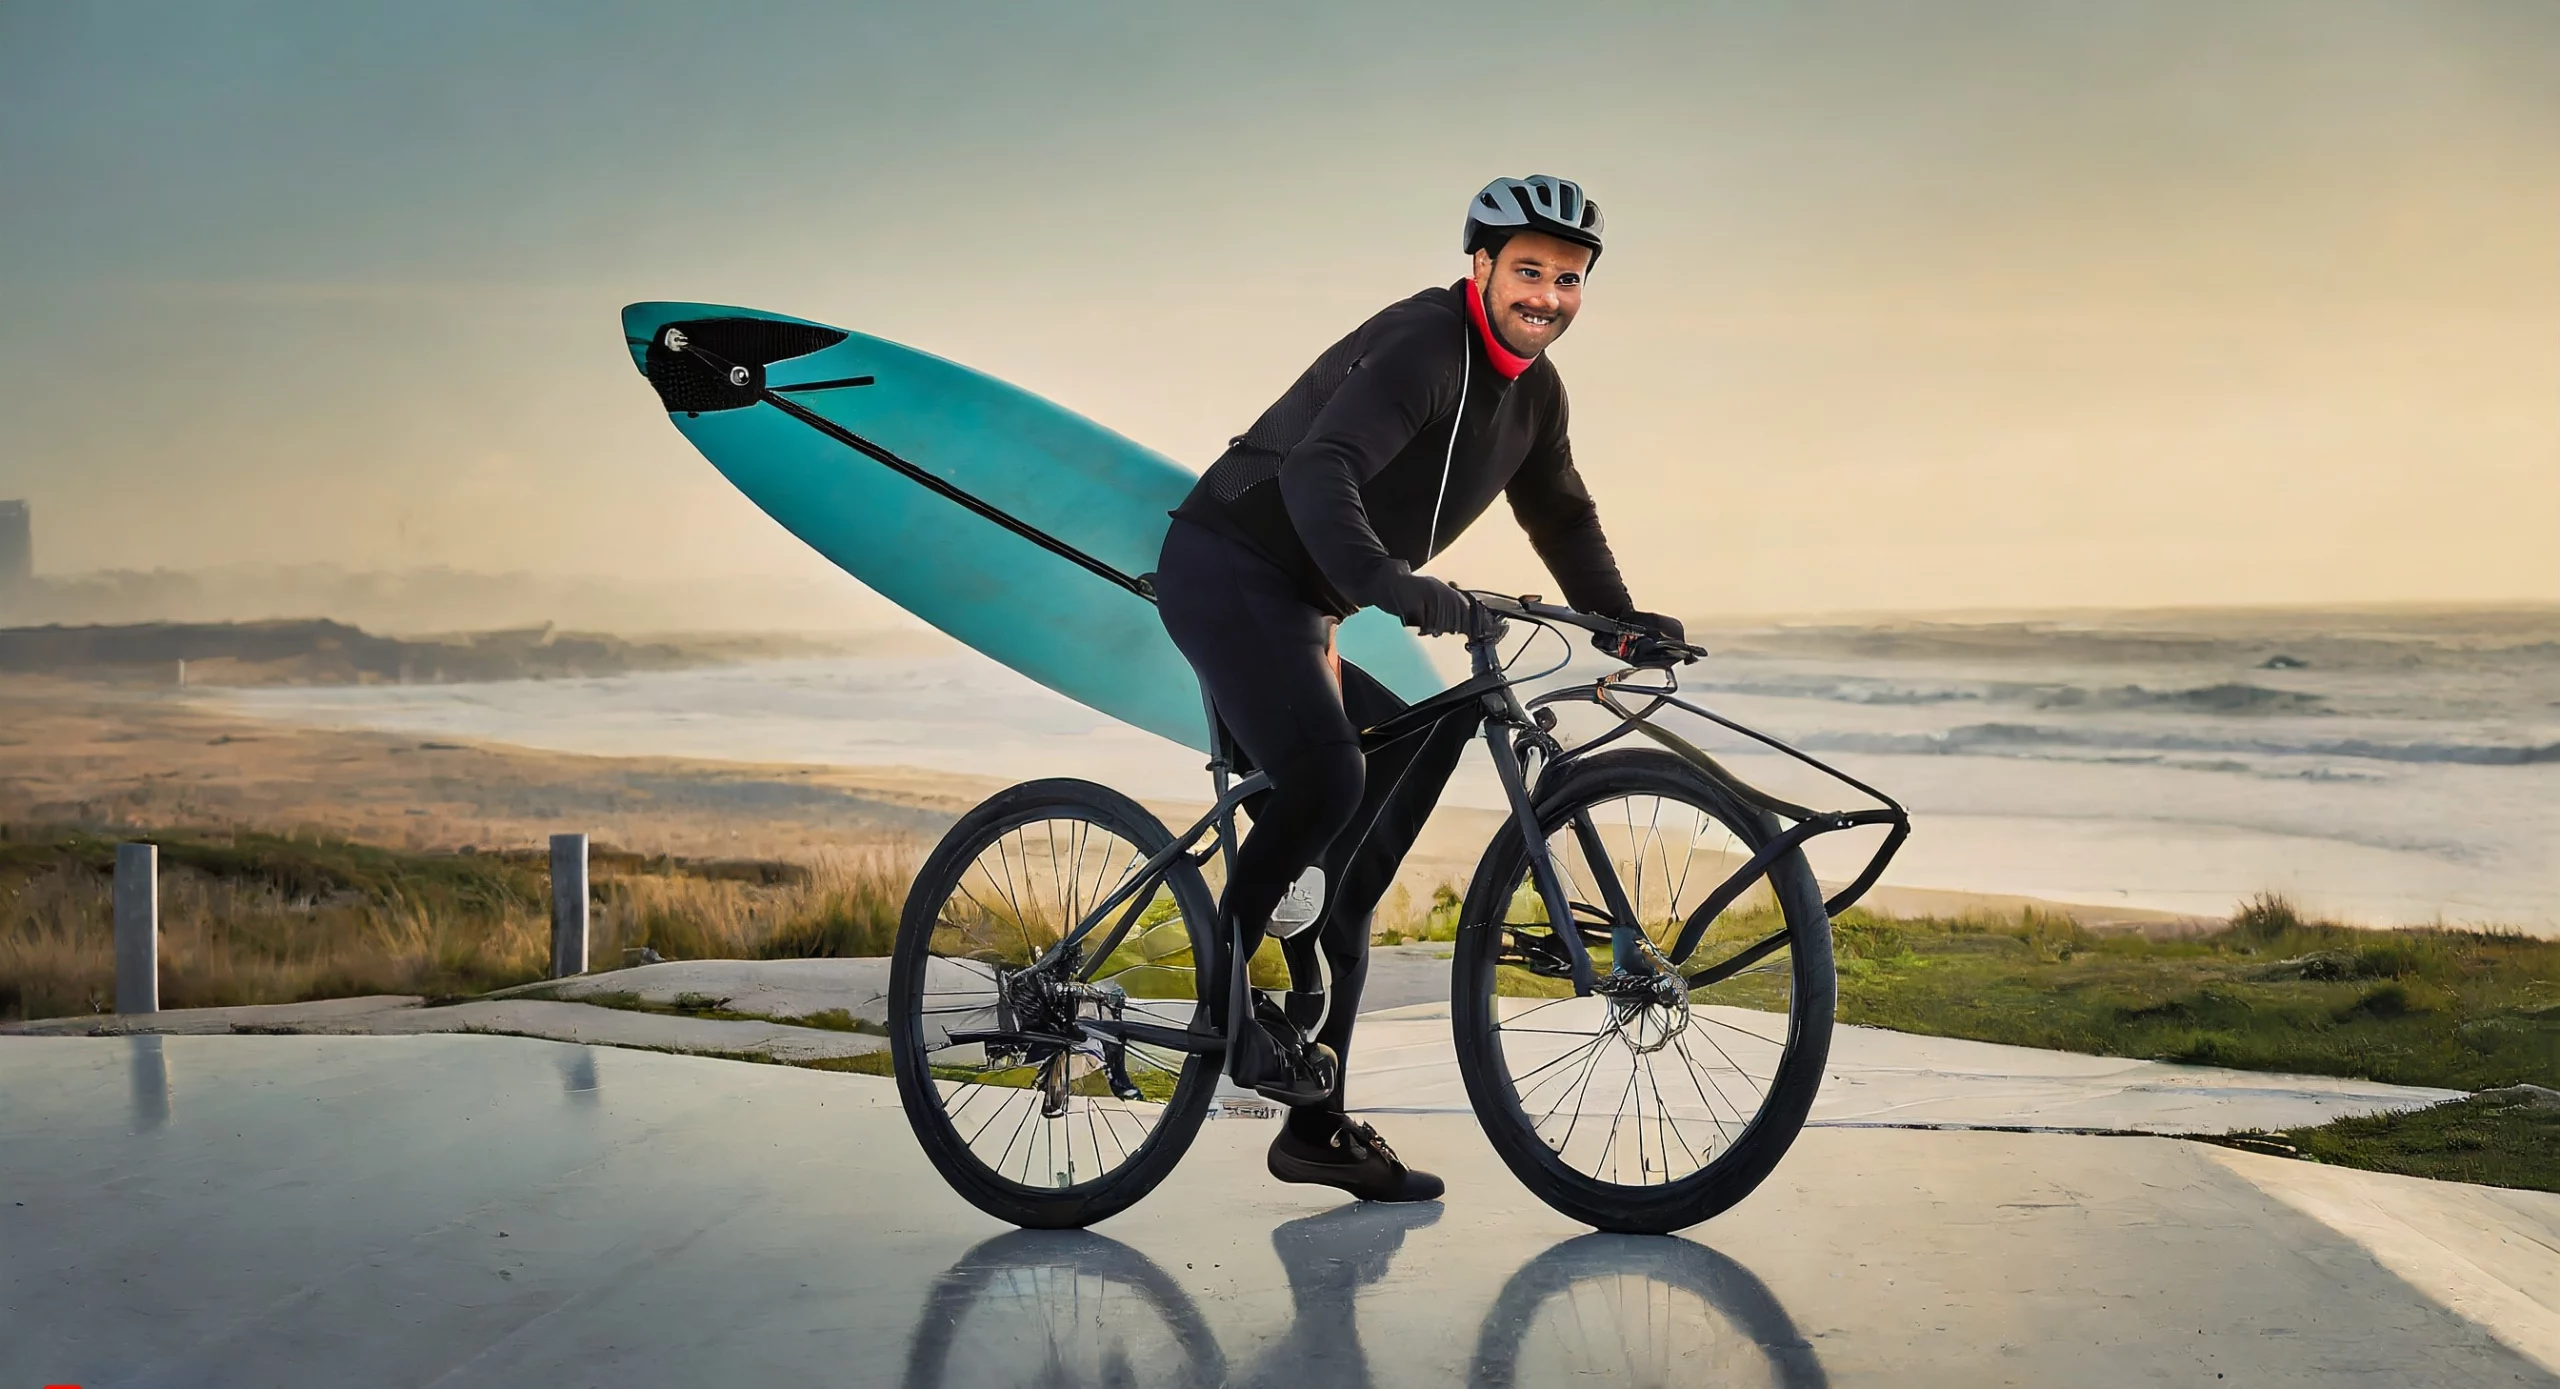 How to Take a Surfboard On An Electric Bike?